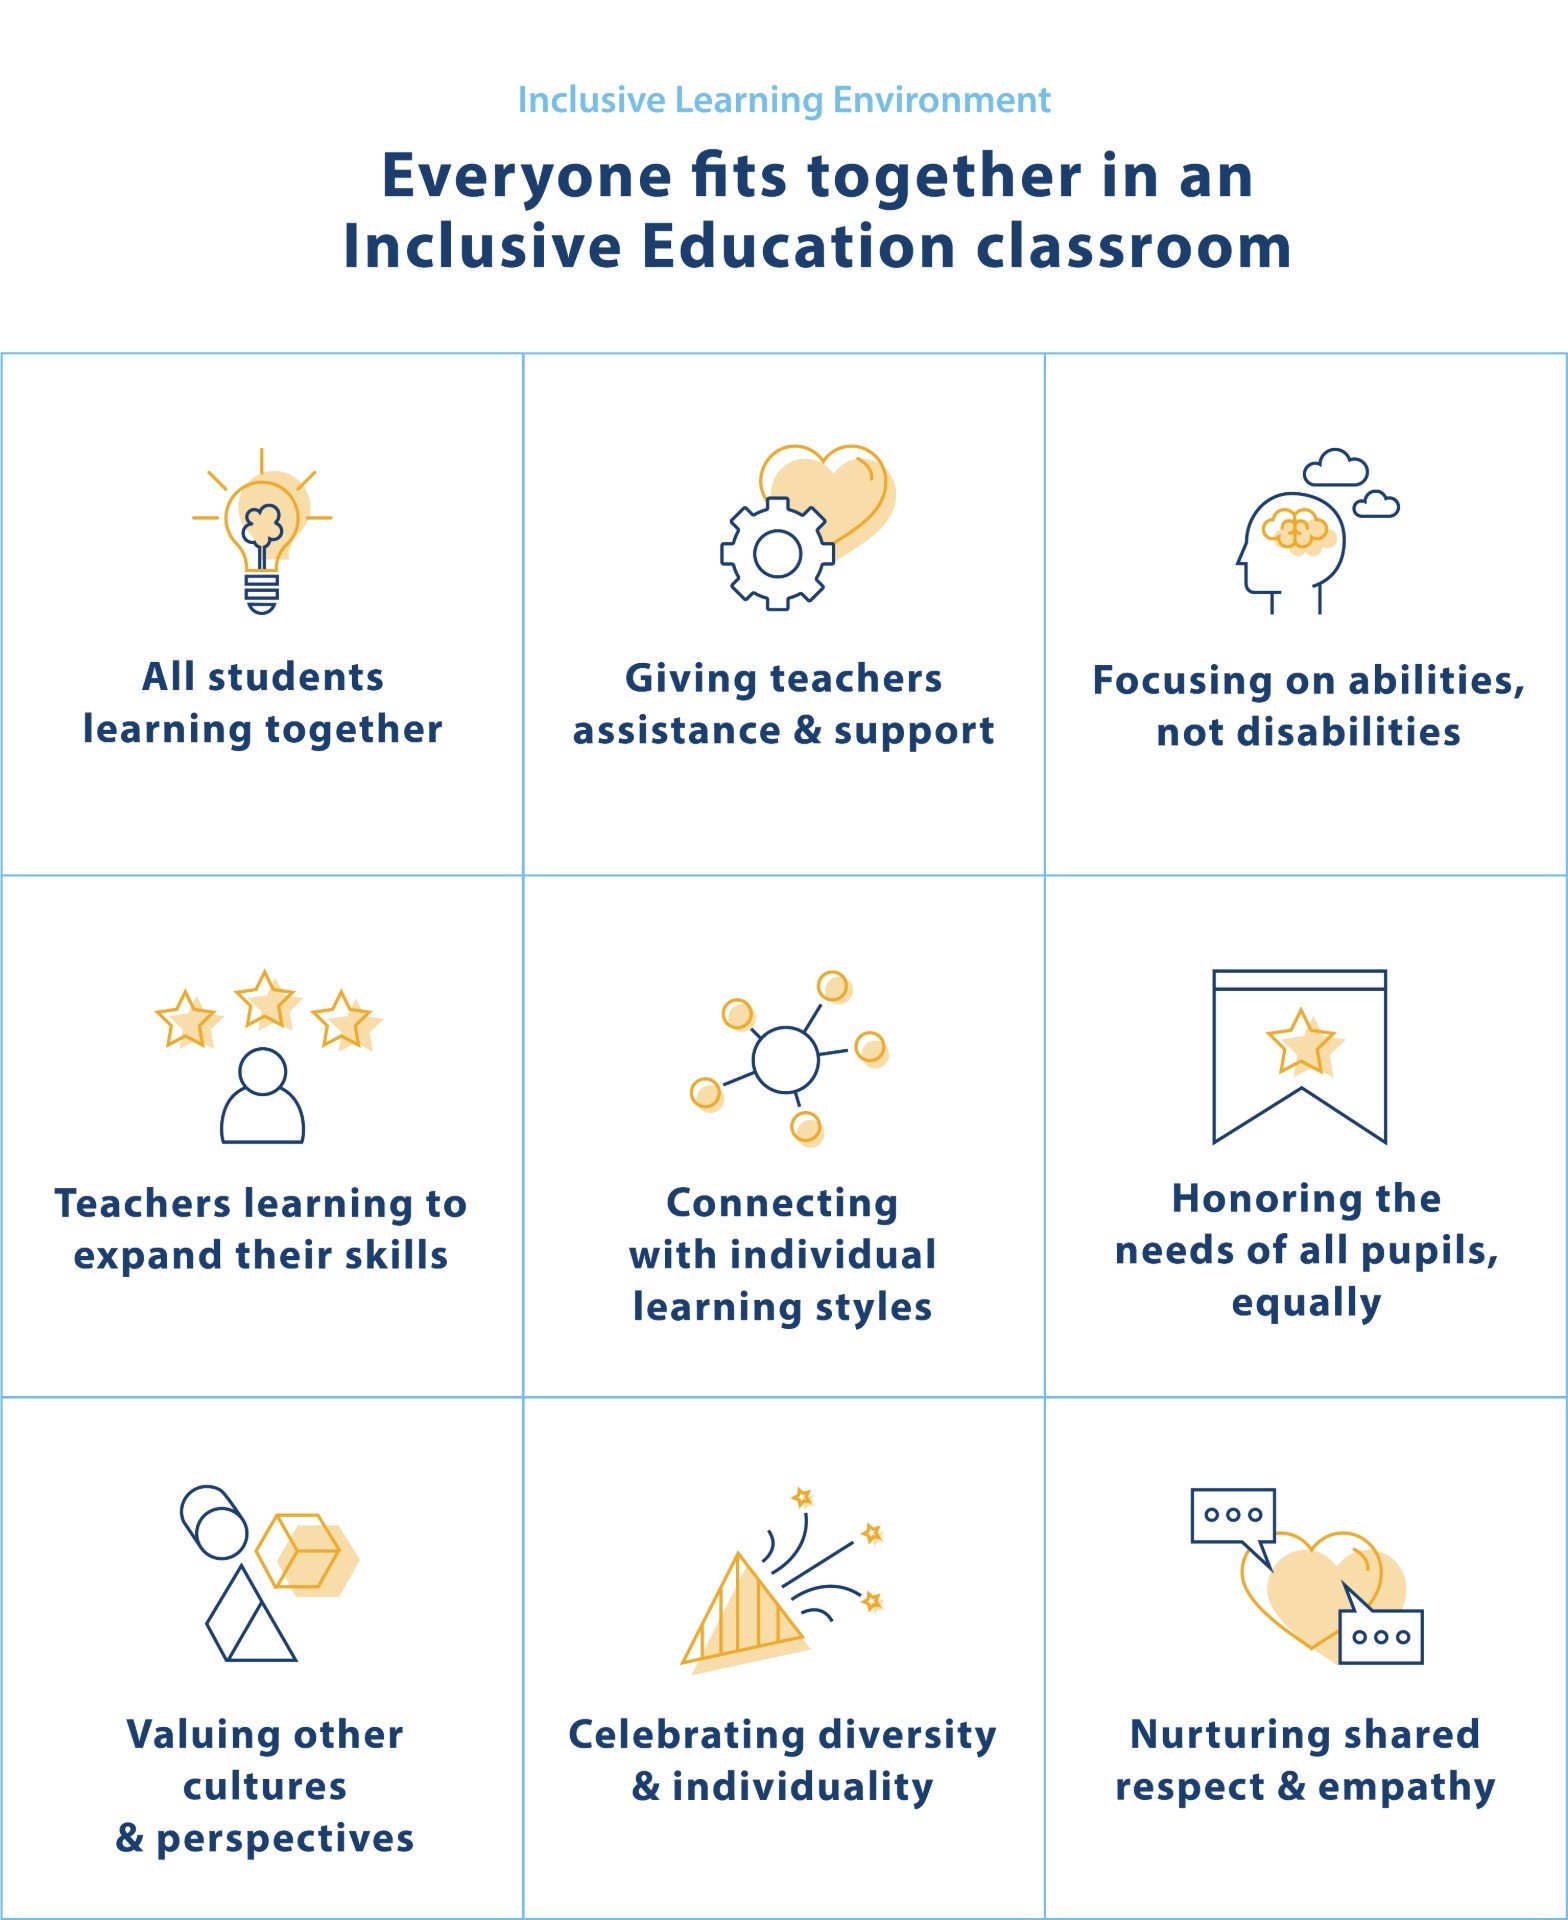 why is it important to create an inclusive learning environment